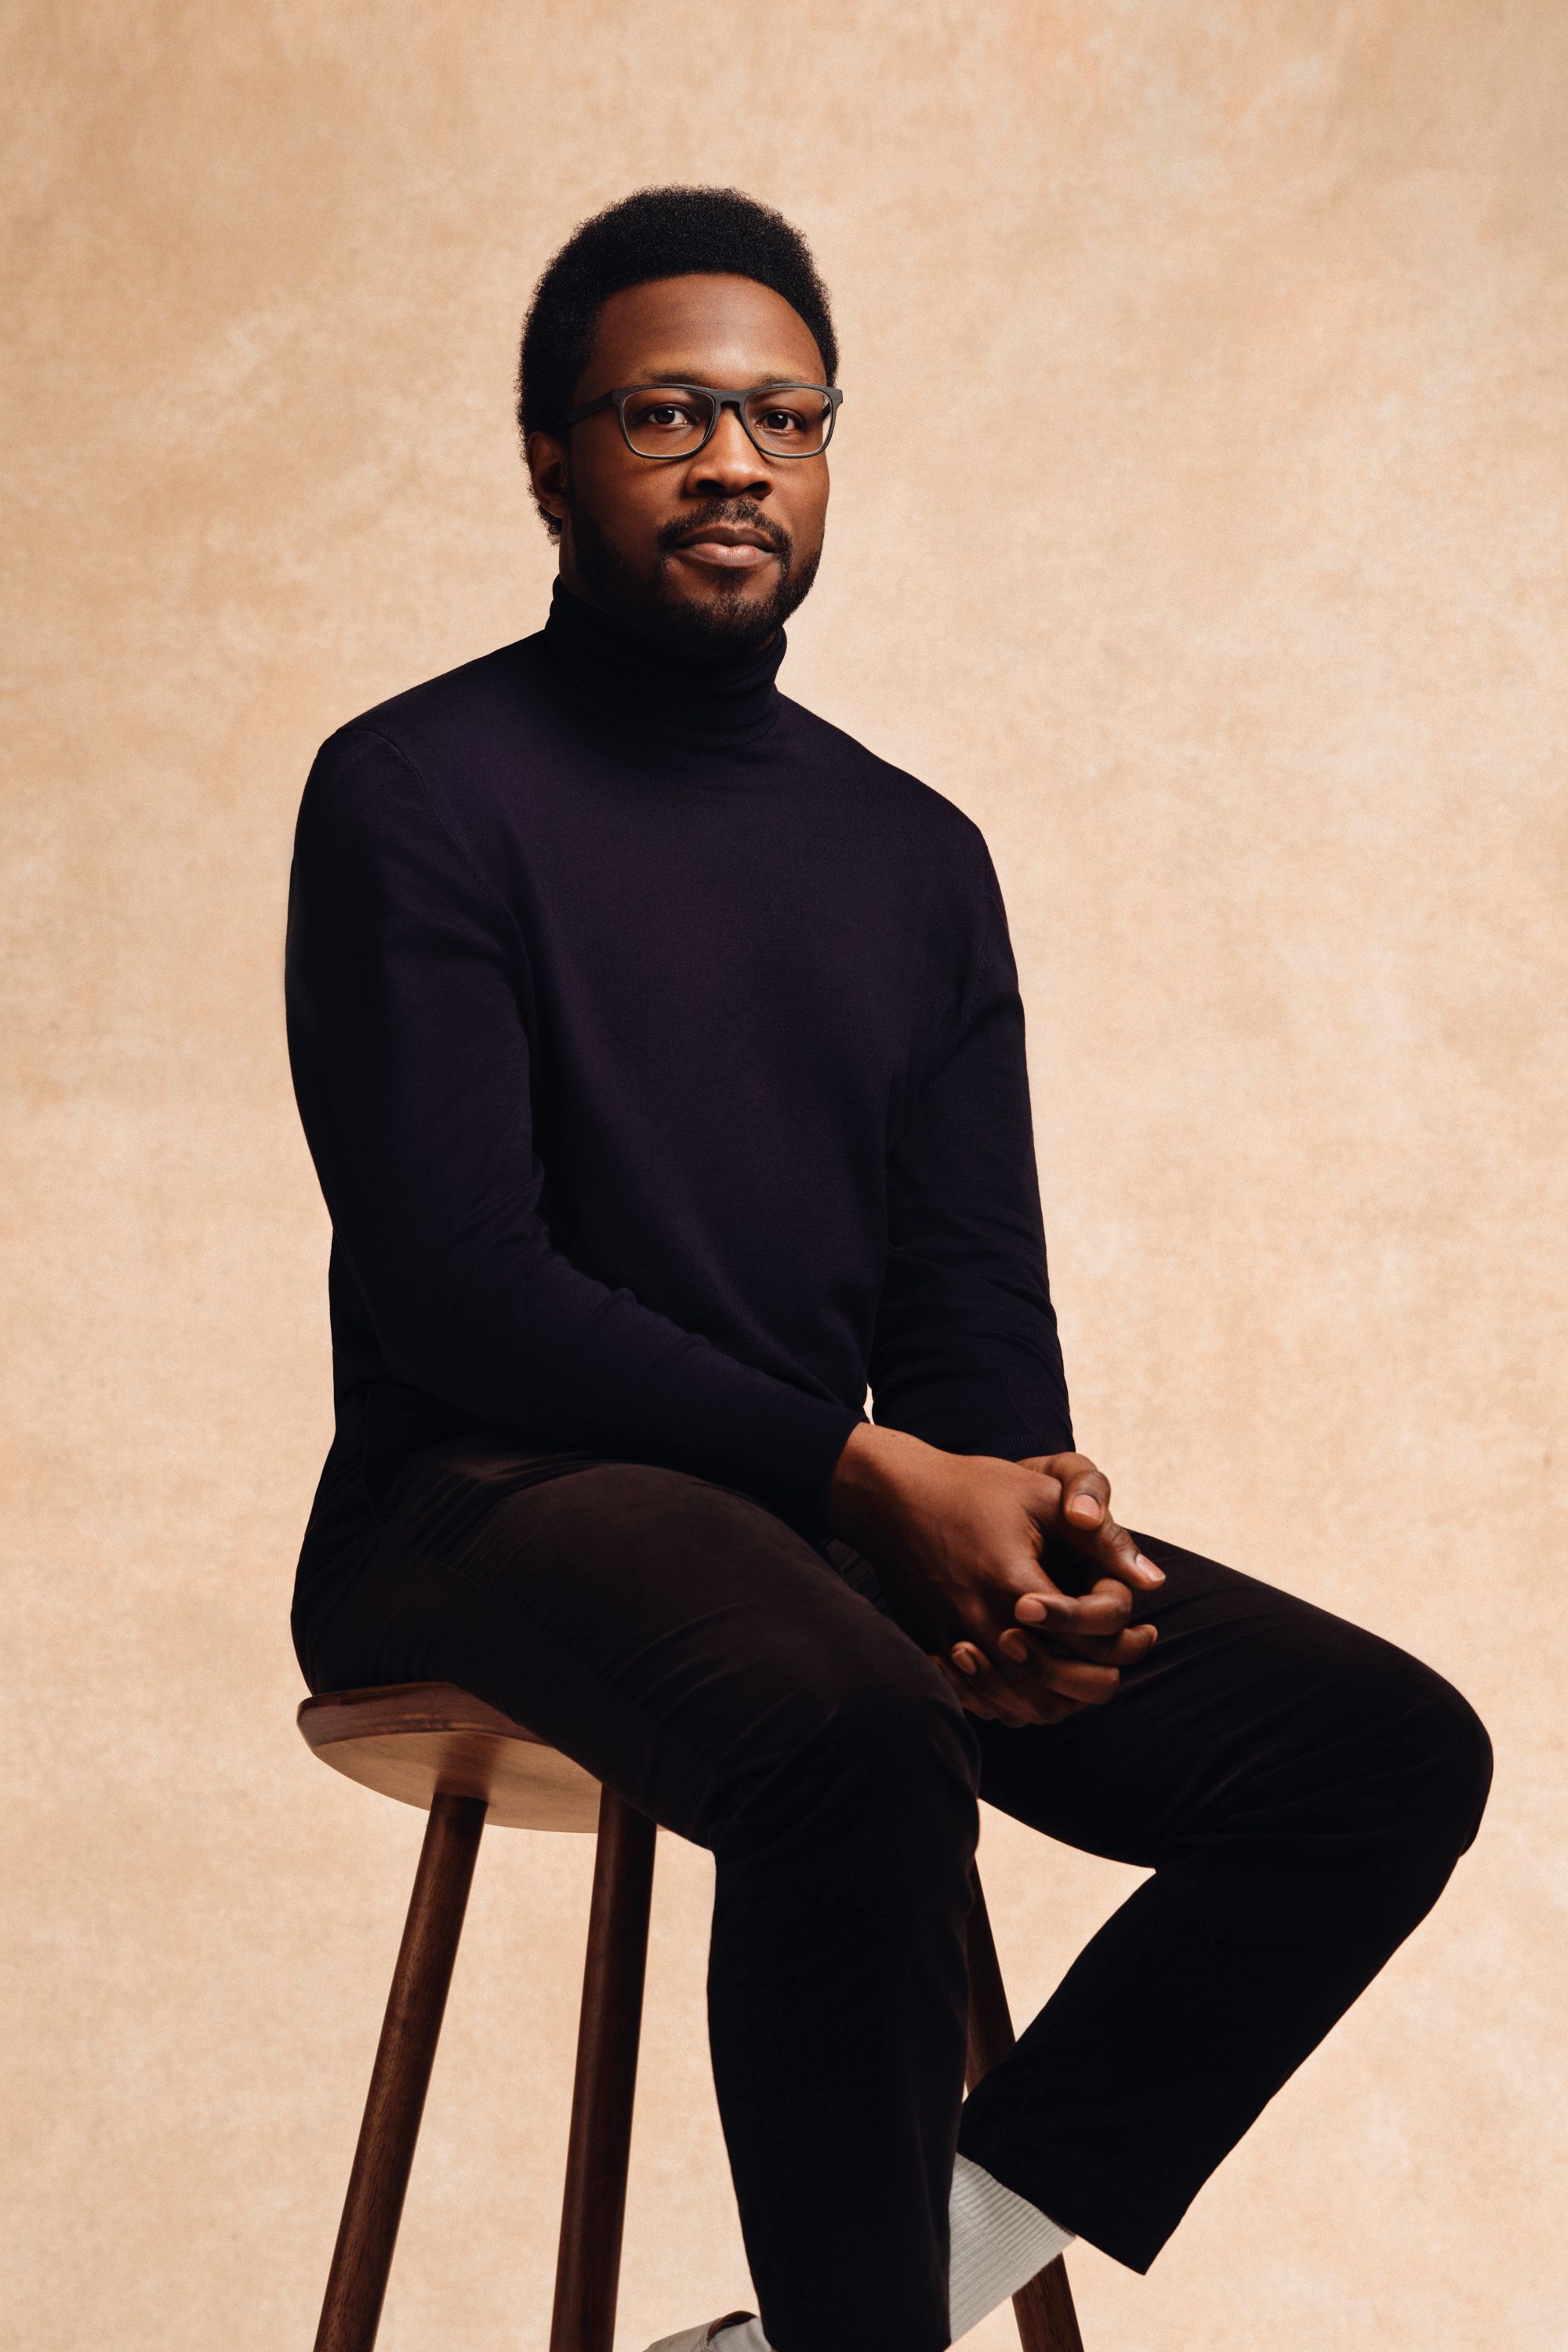 Ben Wilson sits on a stool with a pale background. He is wearing a black turtleneck and trousers.